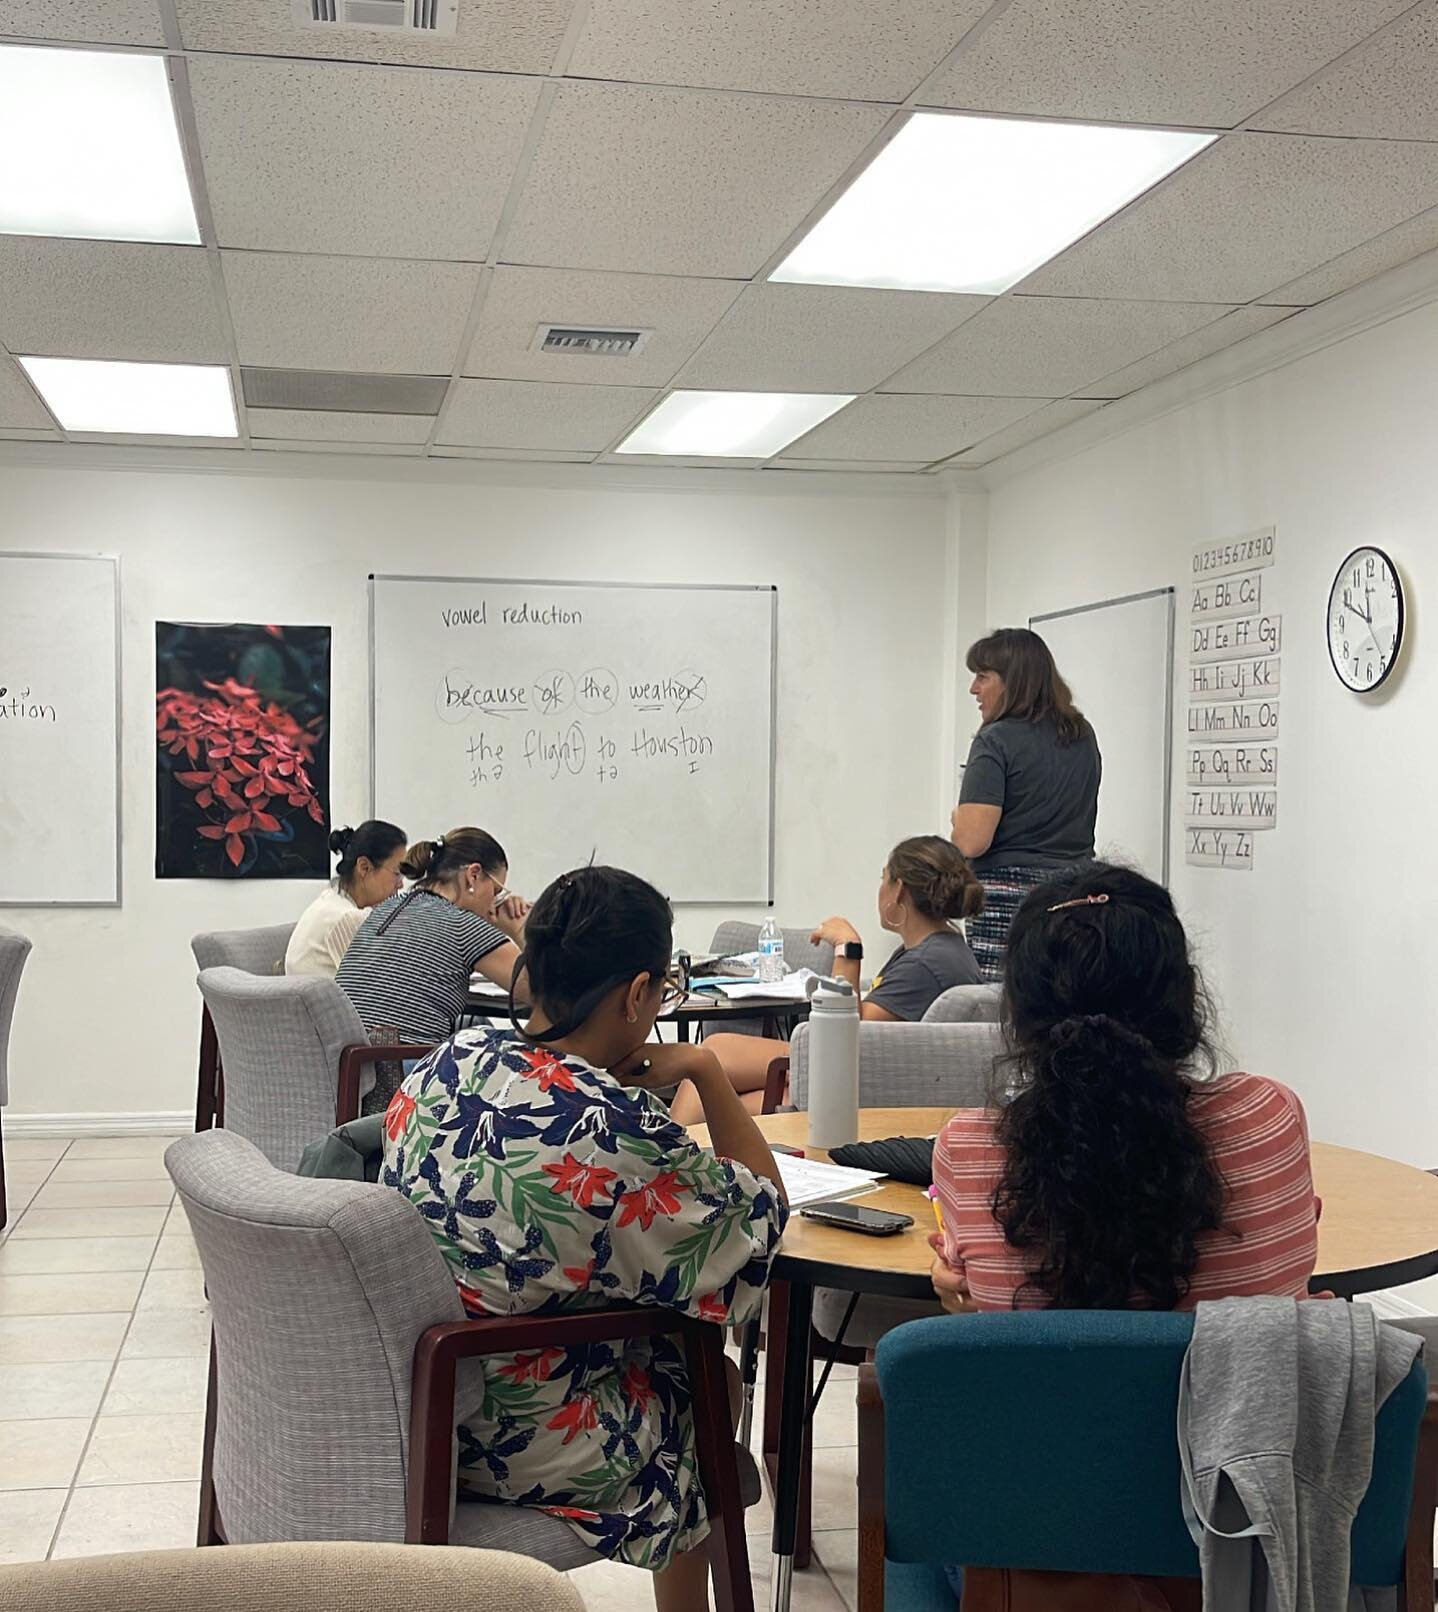 Looking for English classes in North Palm Beach or Stuart? Join us at Institute ACE!
.
.
.
.
.
DM us for more information!